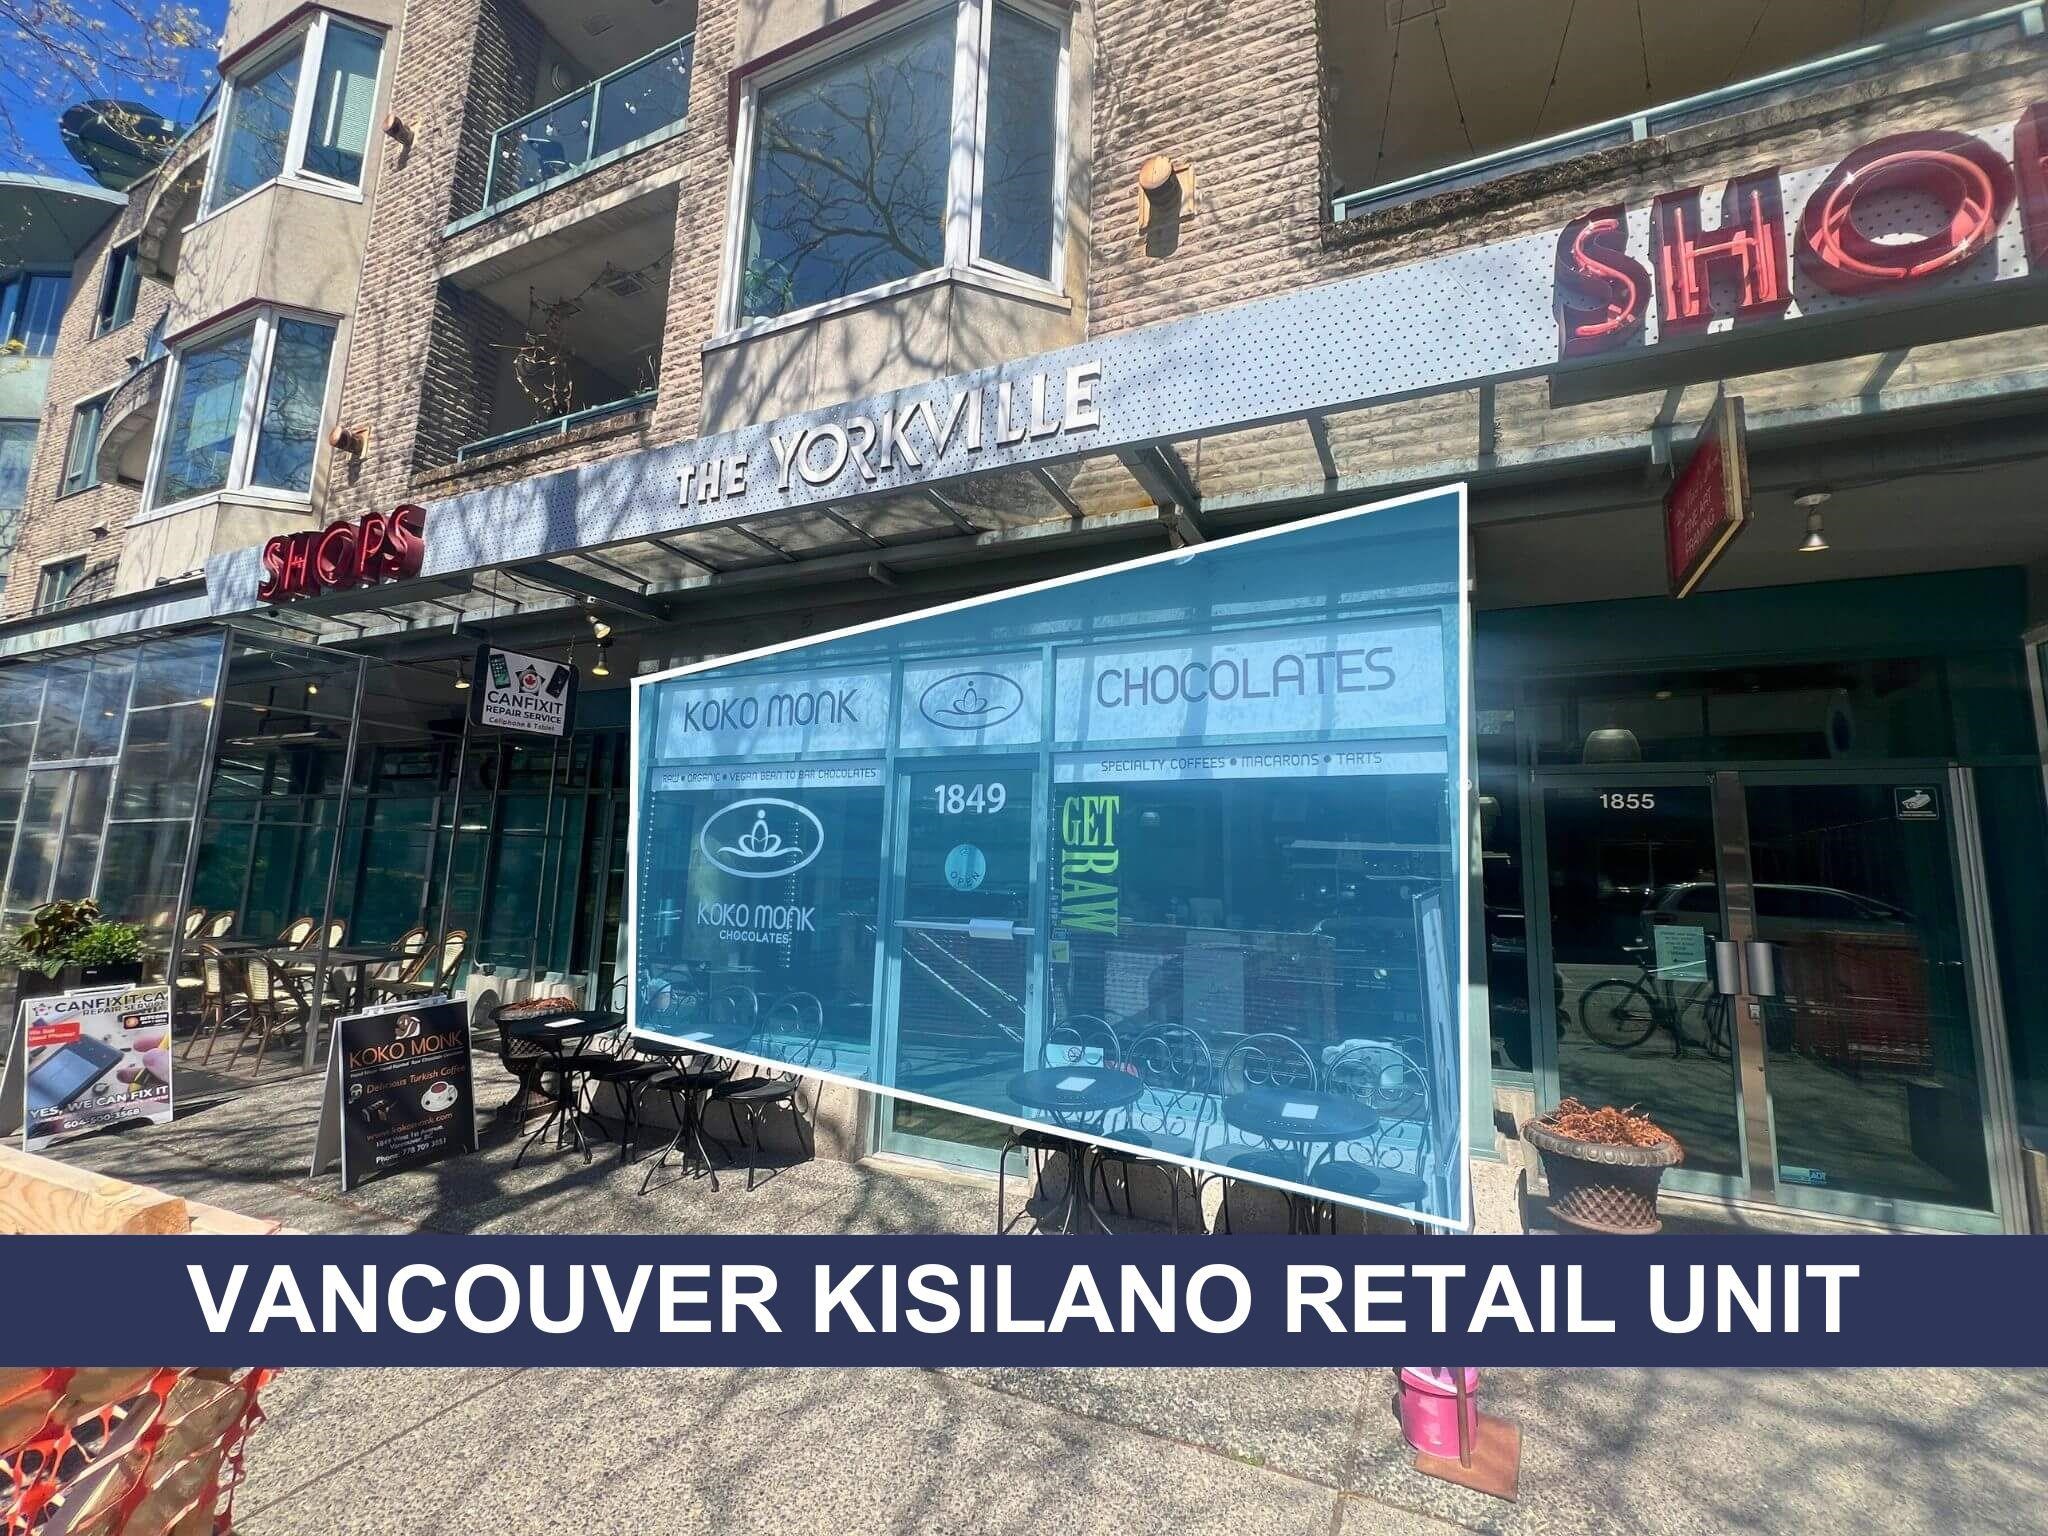 Kitsilano Land Commercial for sale:    (Listed 6800-05-05)